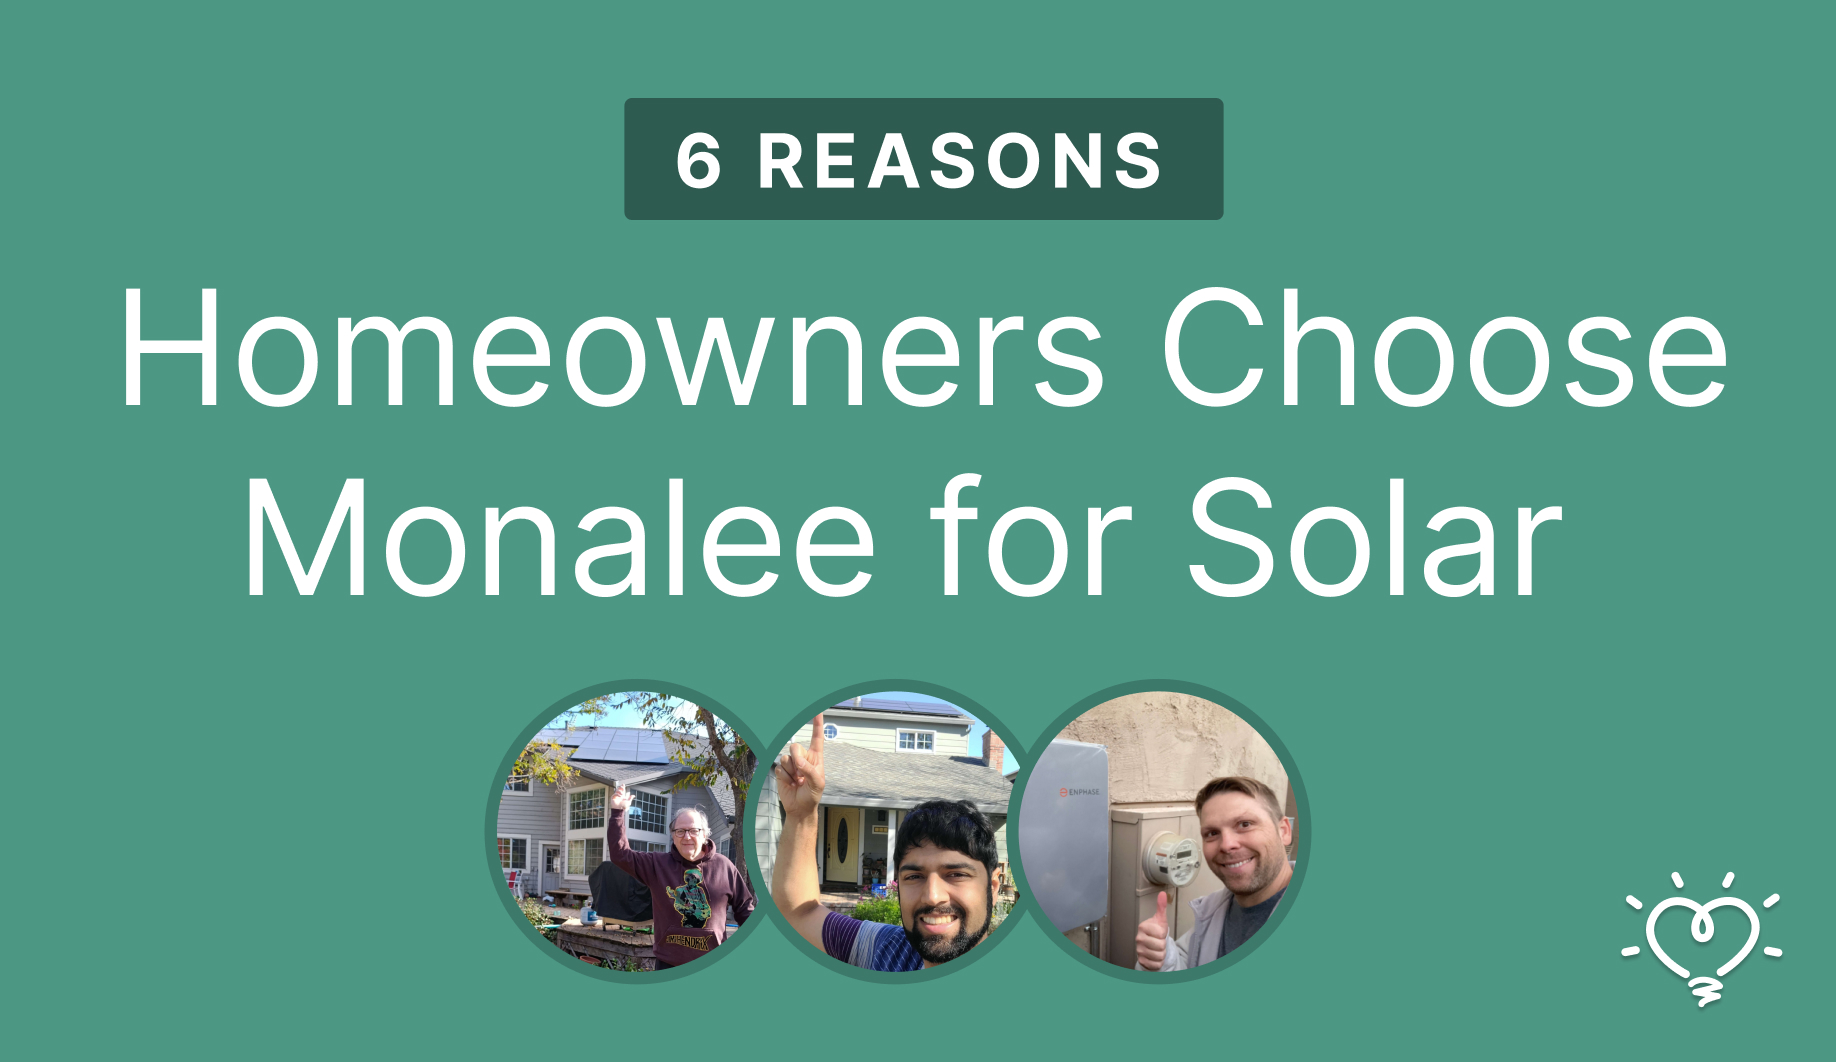 6 Reasons Homeowners Choose Monalee for Solar (according to our customers)